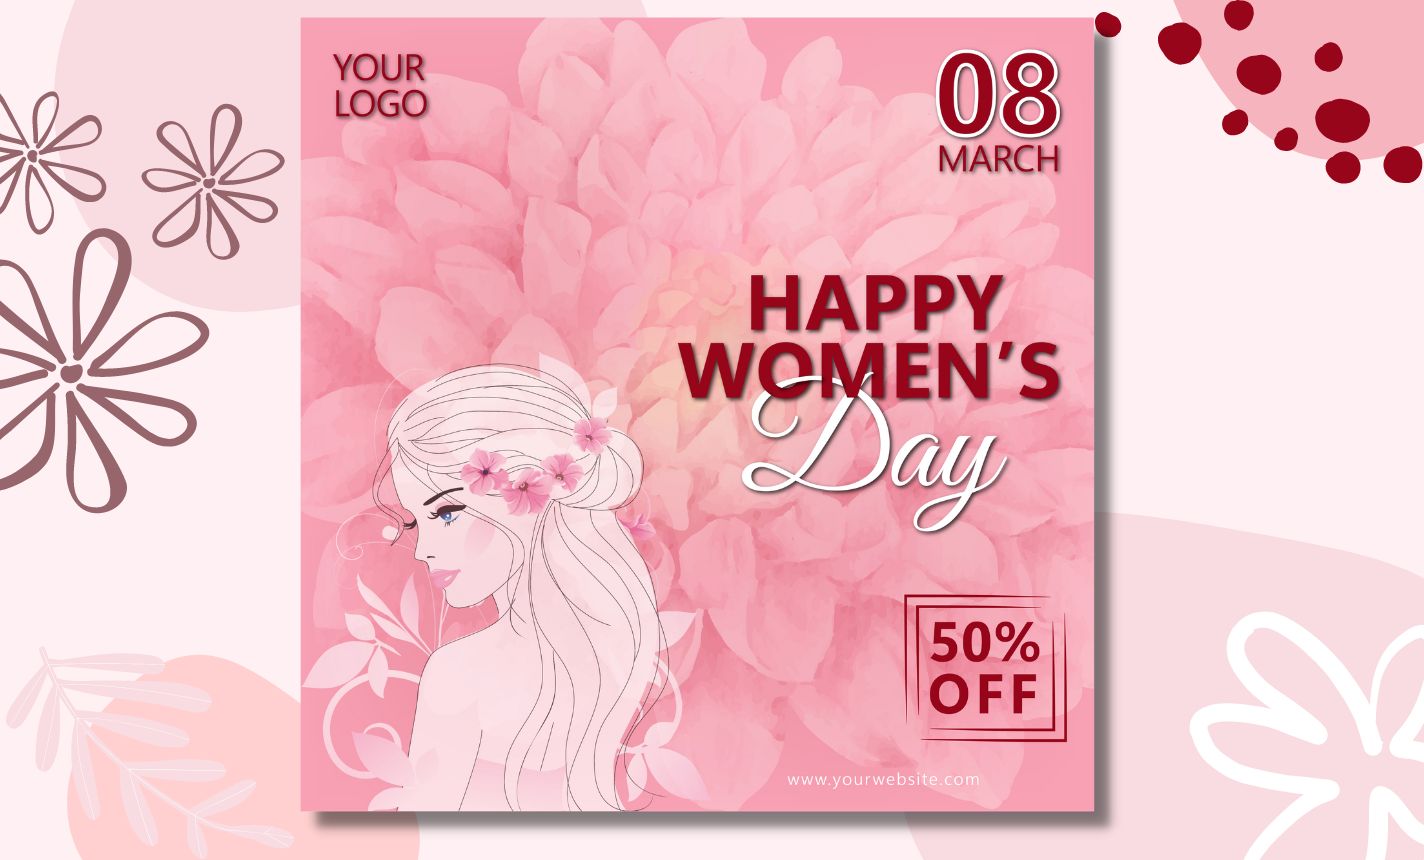 Woman's day flyer with flowers.